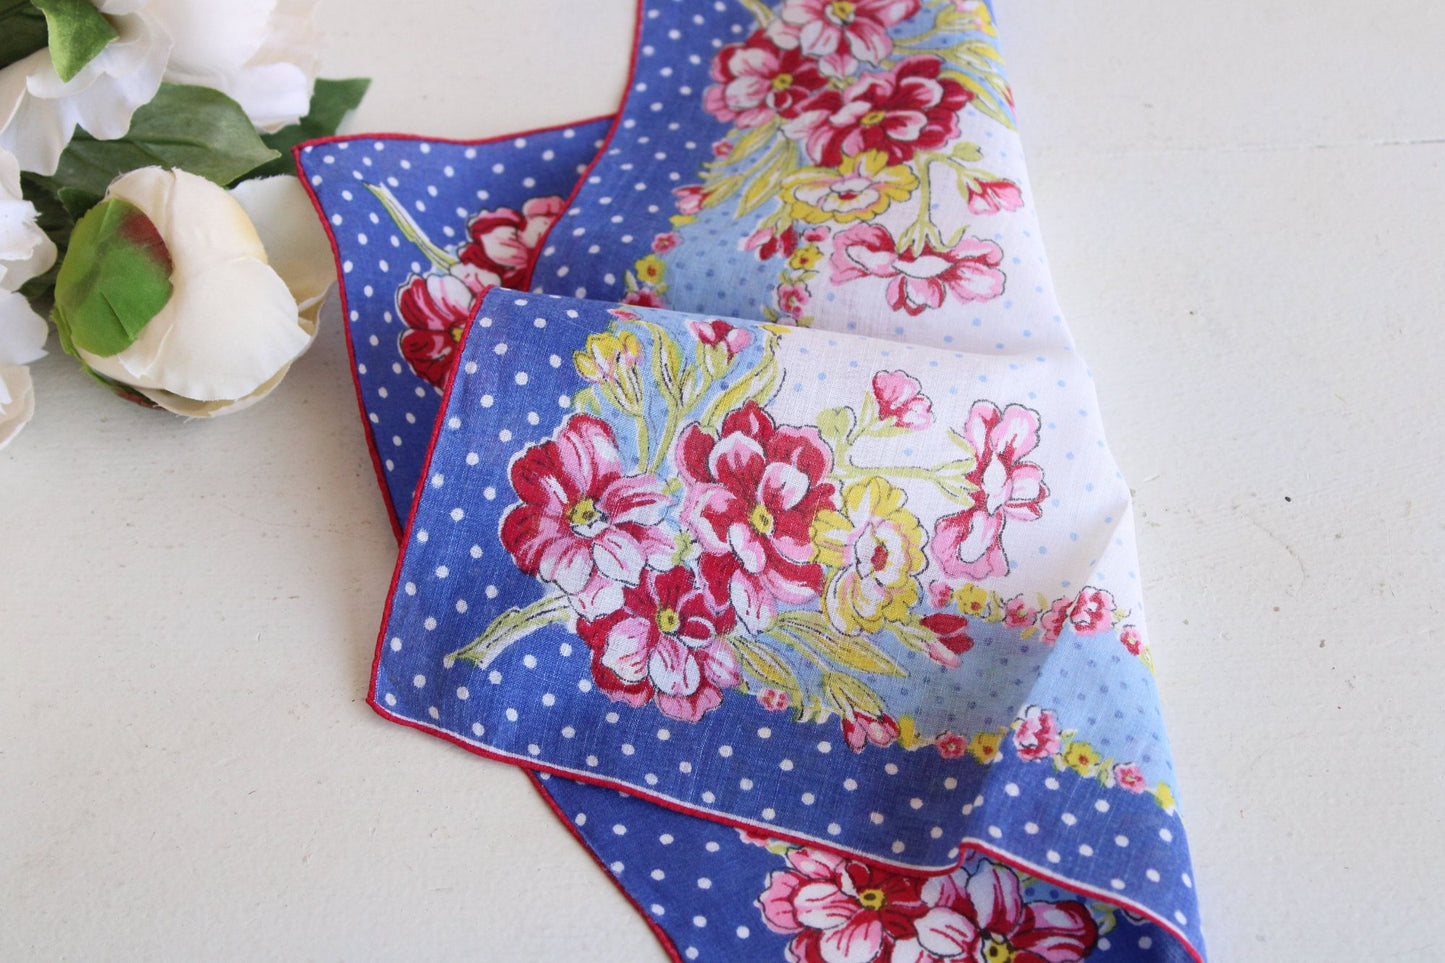 Vintage Cotton Handkerchief with Red White and Blue Flowers